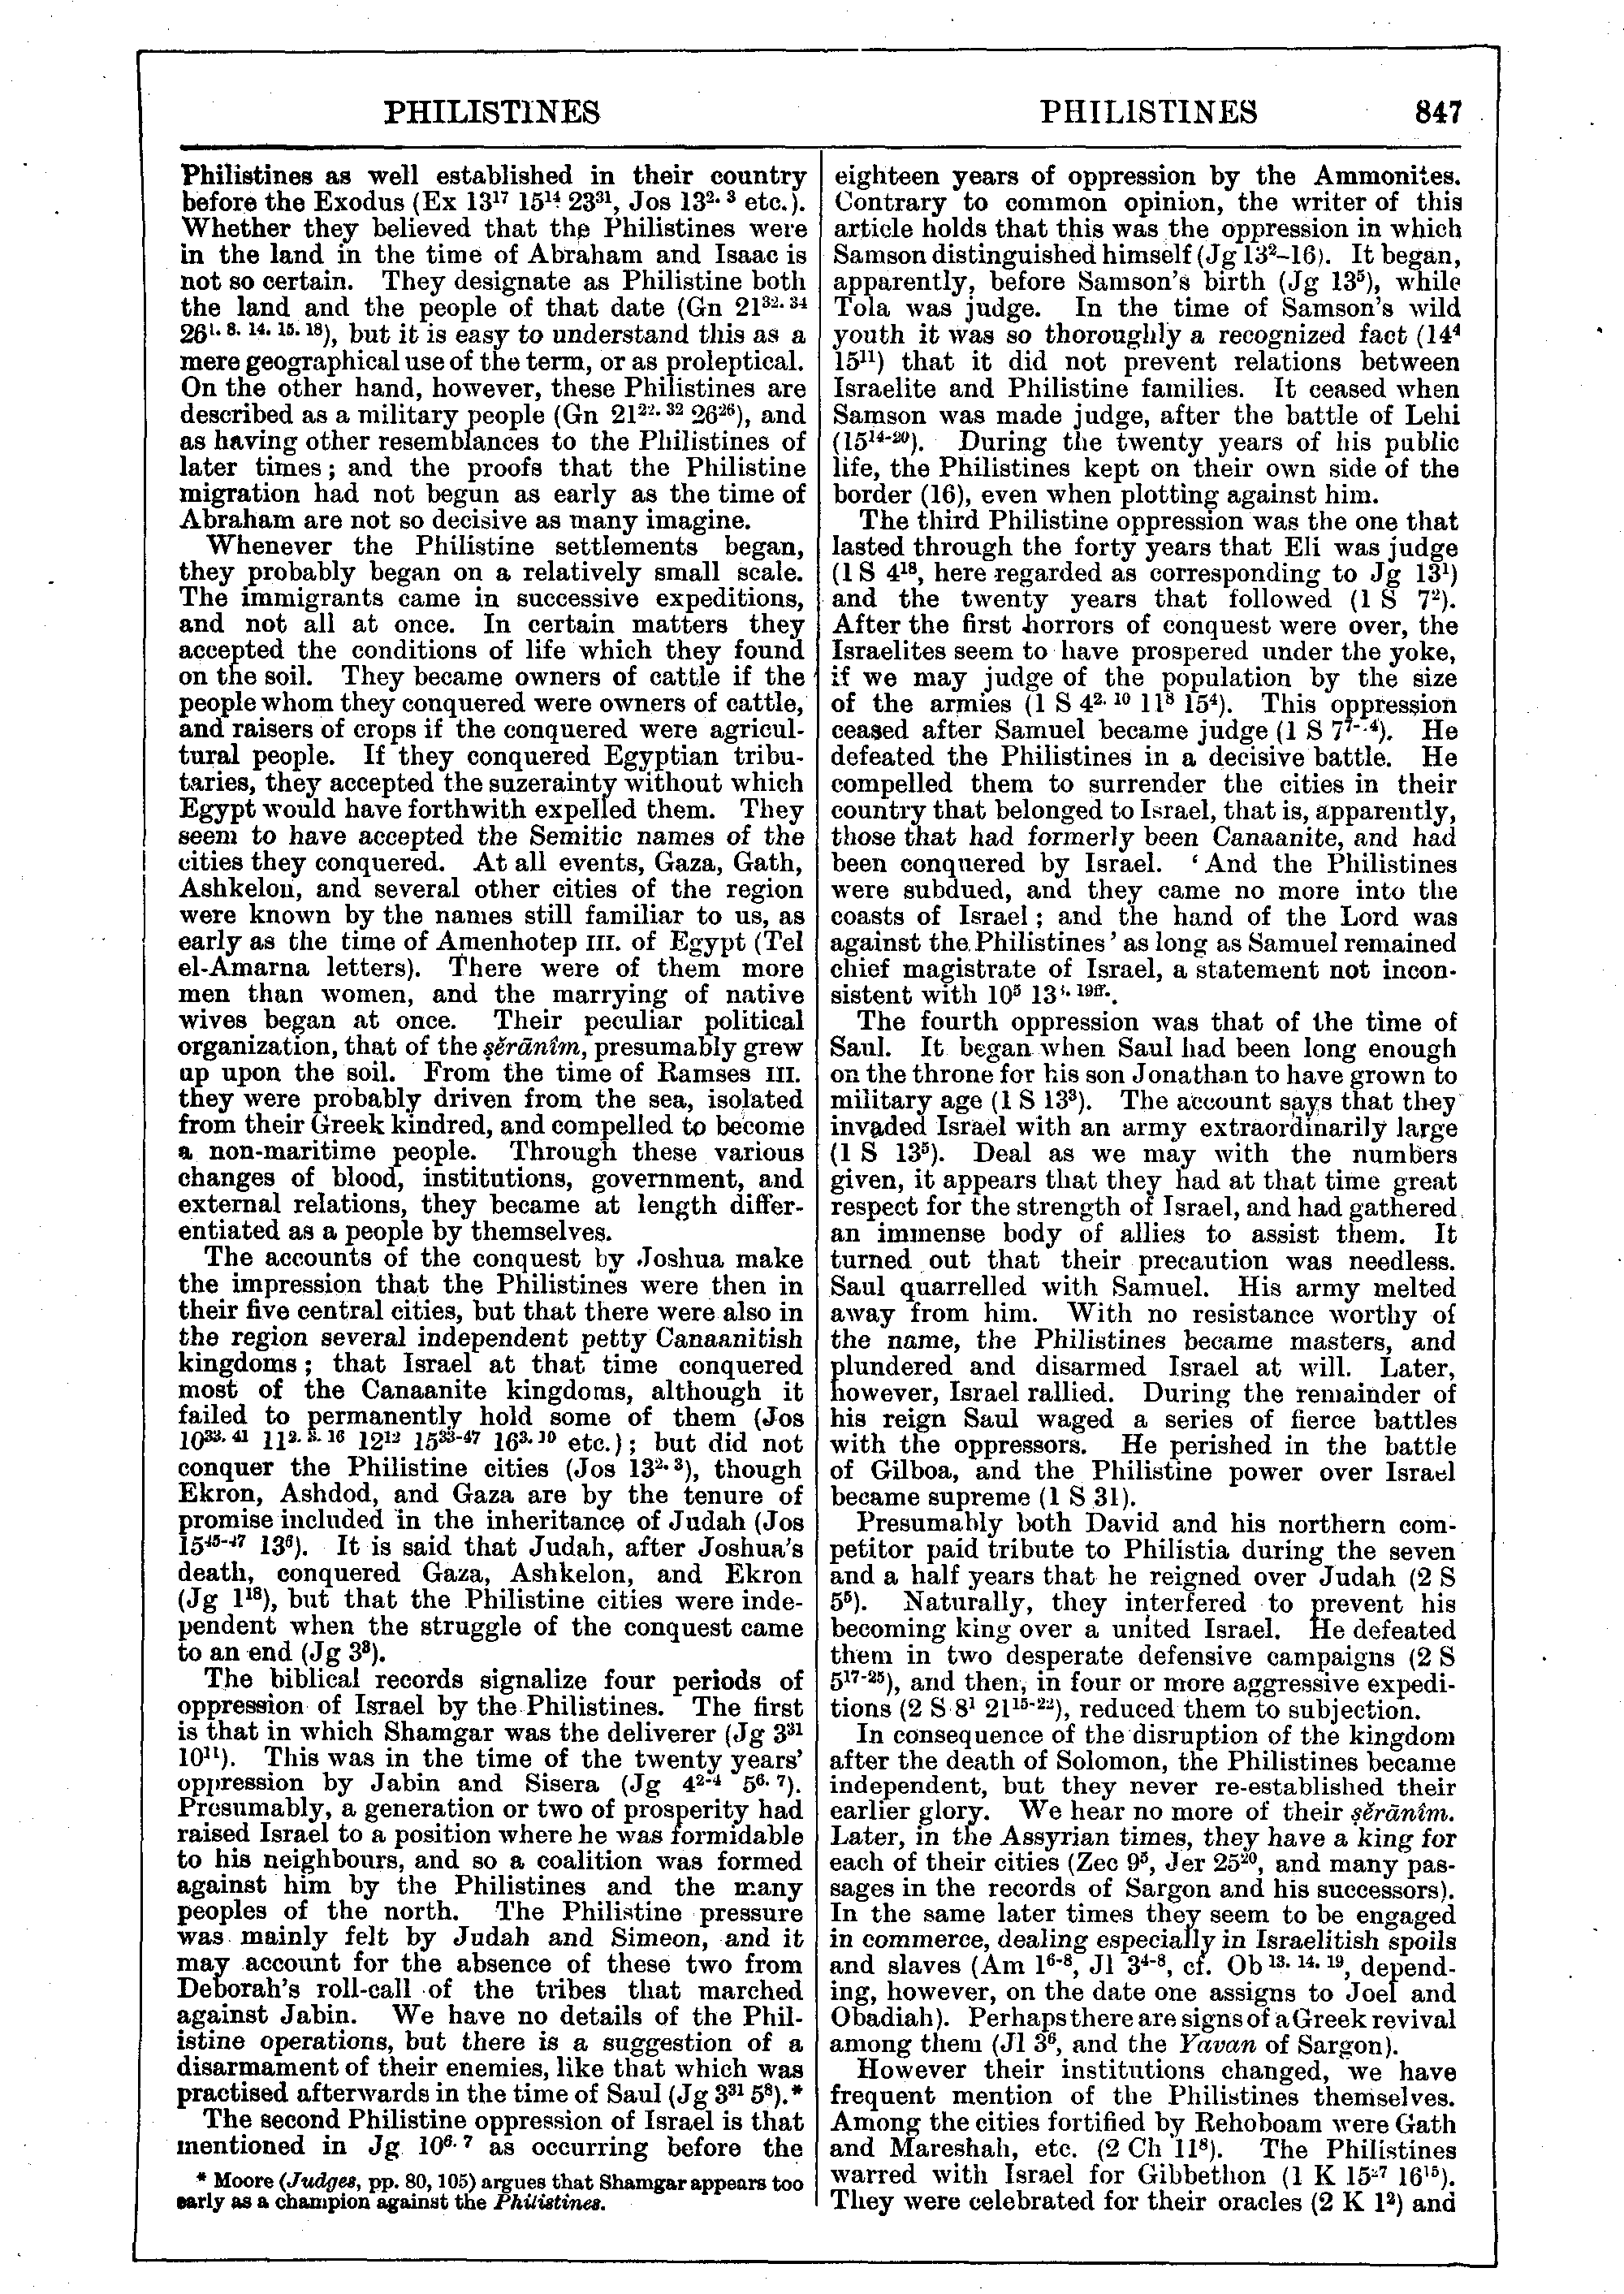 Image of page 847